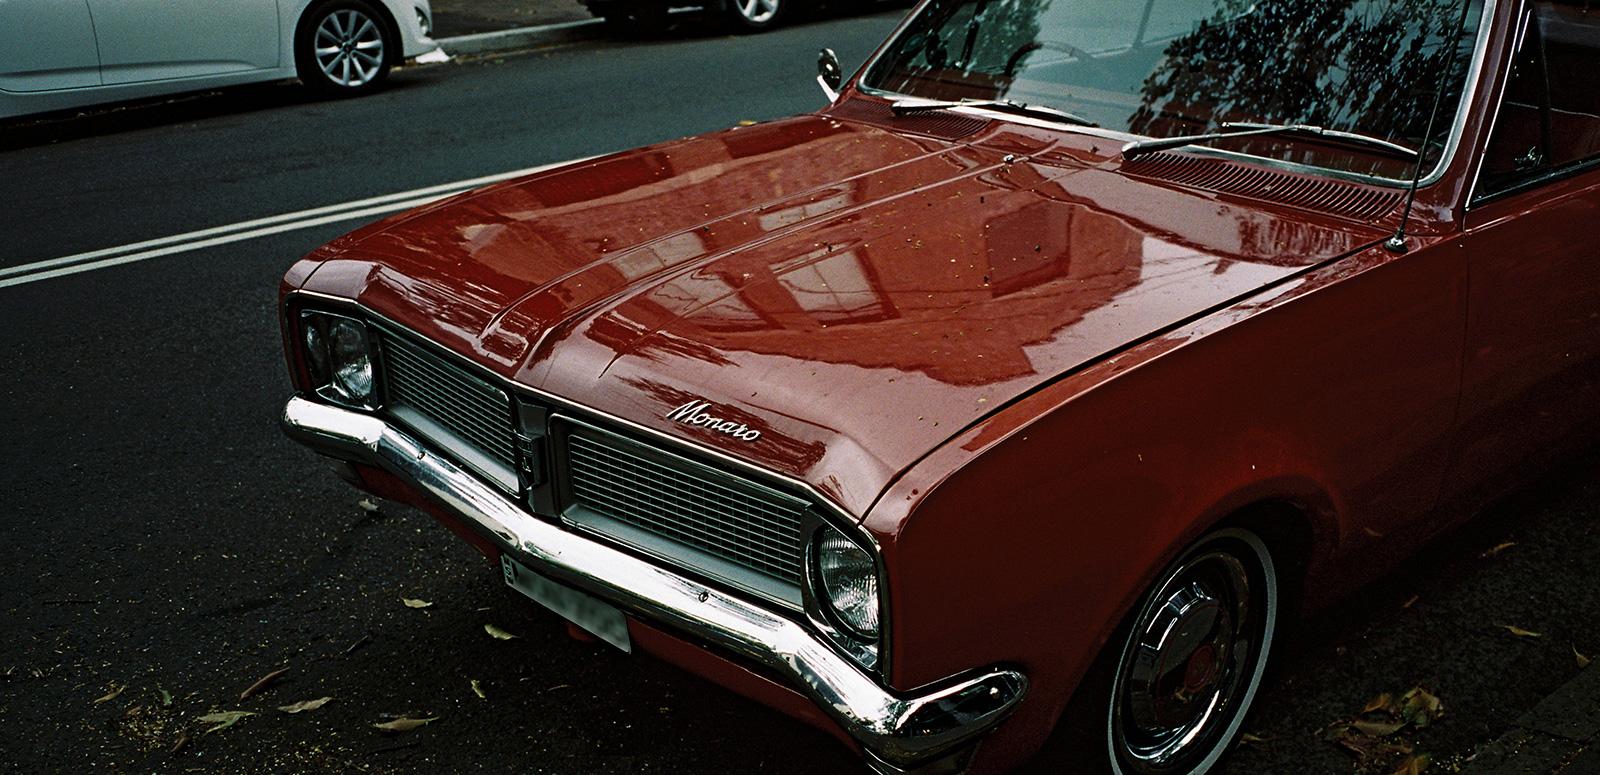 The front grill and bonnet of a red Holden Monaro car.